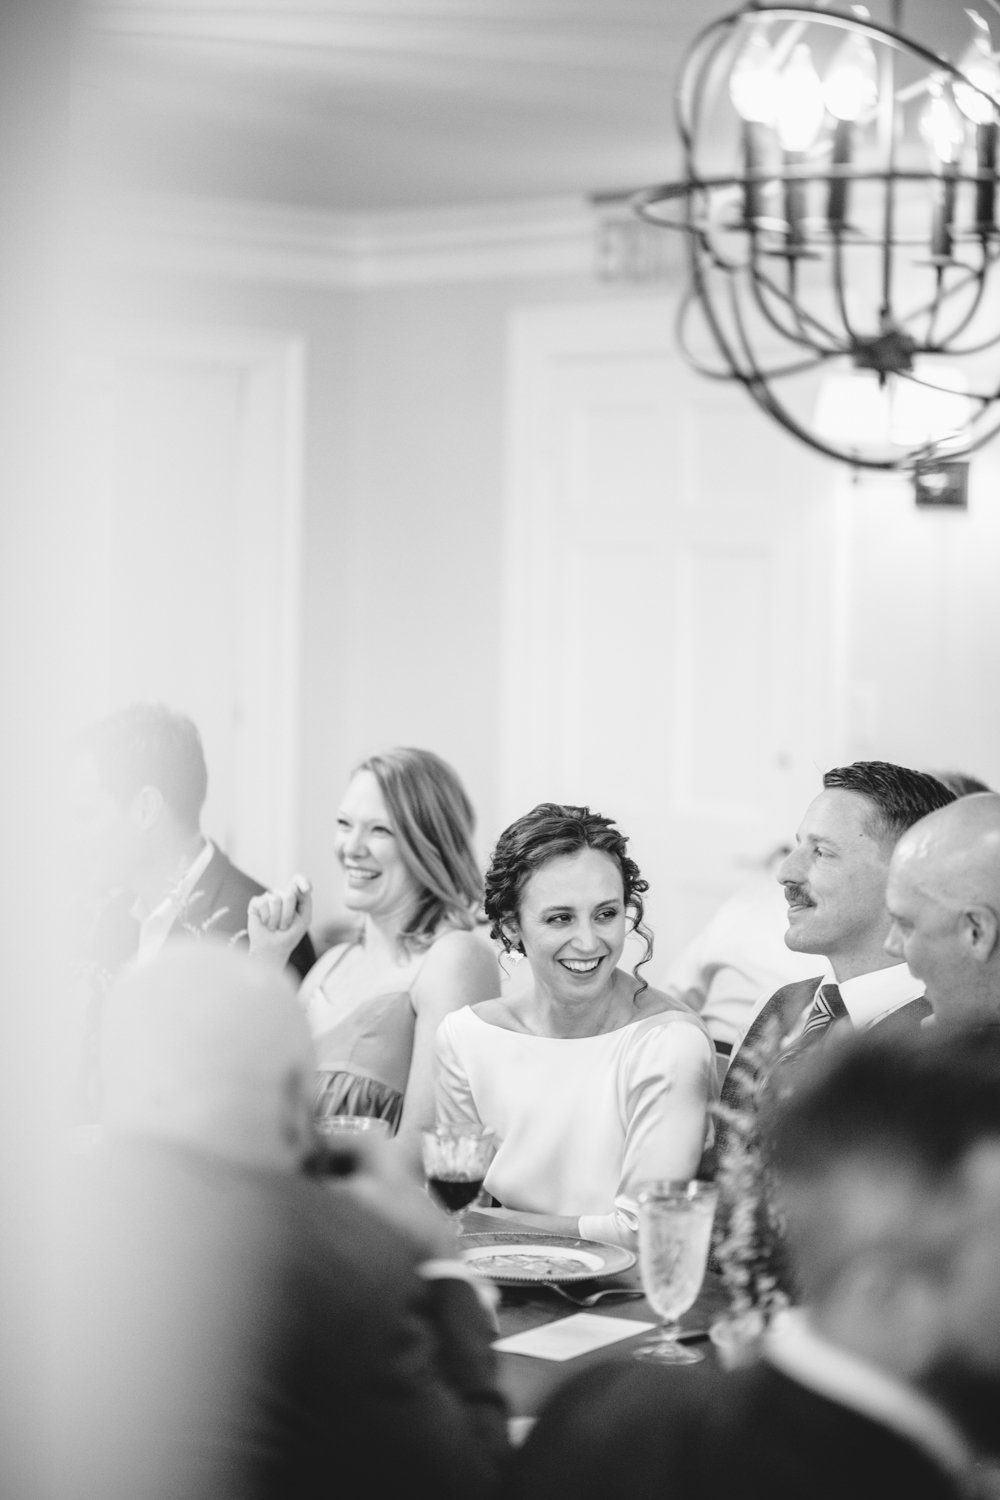 Bride smiles as she sits among wedding guests at the reception.

Upstate New York Wedding Photography. Cold Spring NY Wedding Photography. Luxury Local Wedding Photographer. Destination Wedding Photographer.